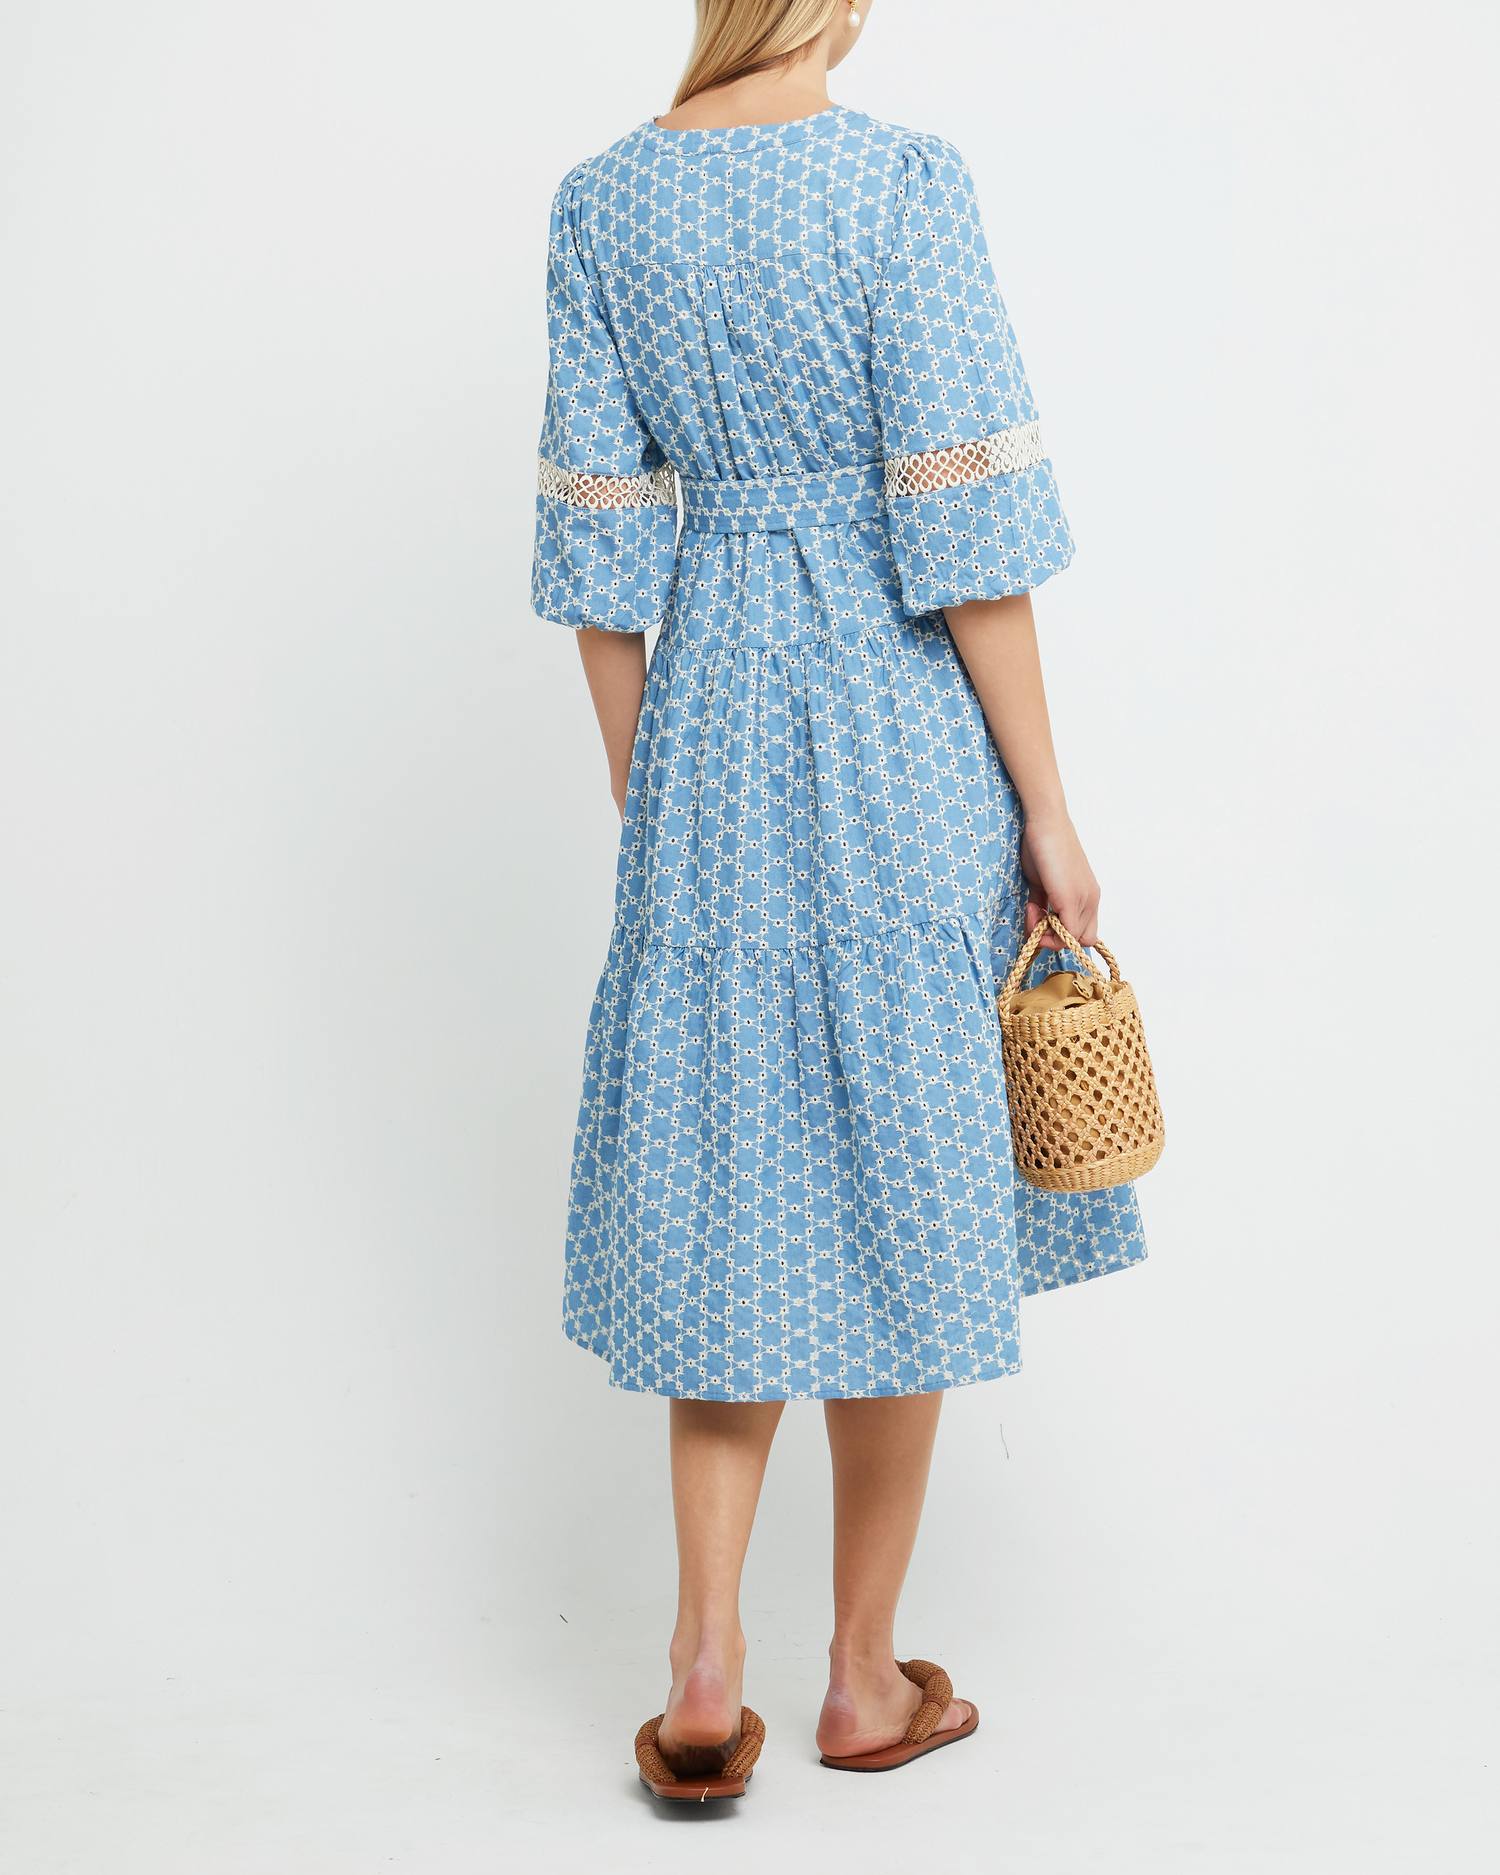 Second image of Haven Dress, a blue midi dress, lace detail, eyelet, waist tie, bow, wrap dress, puff sleeves